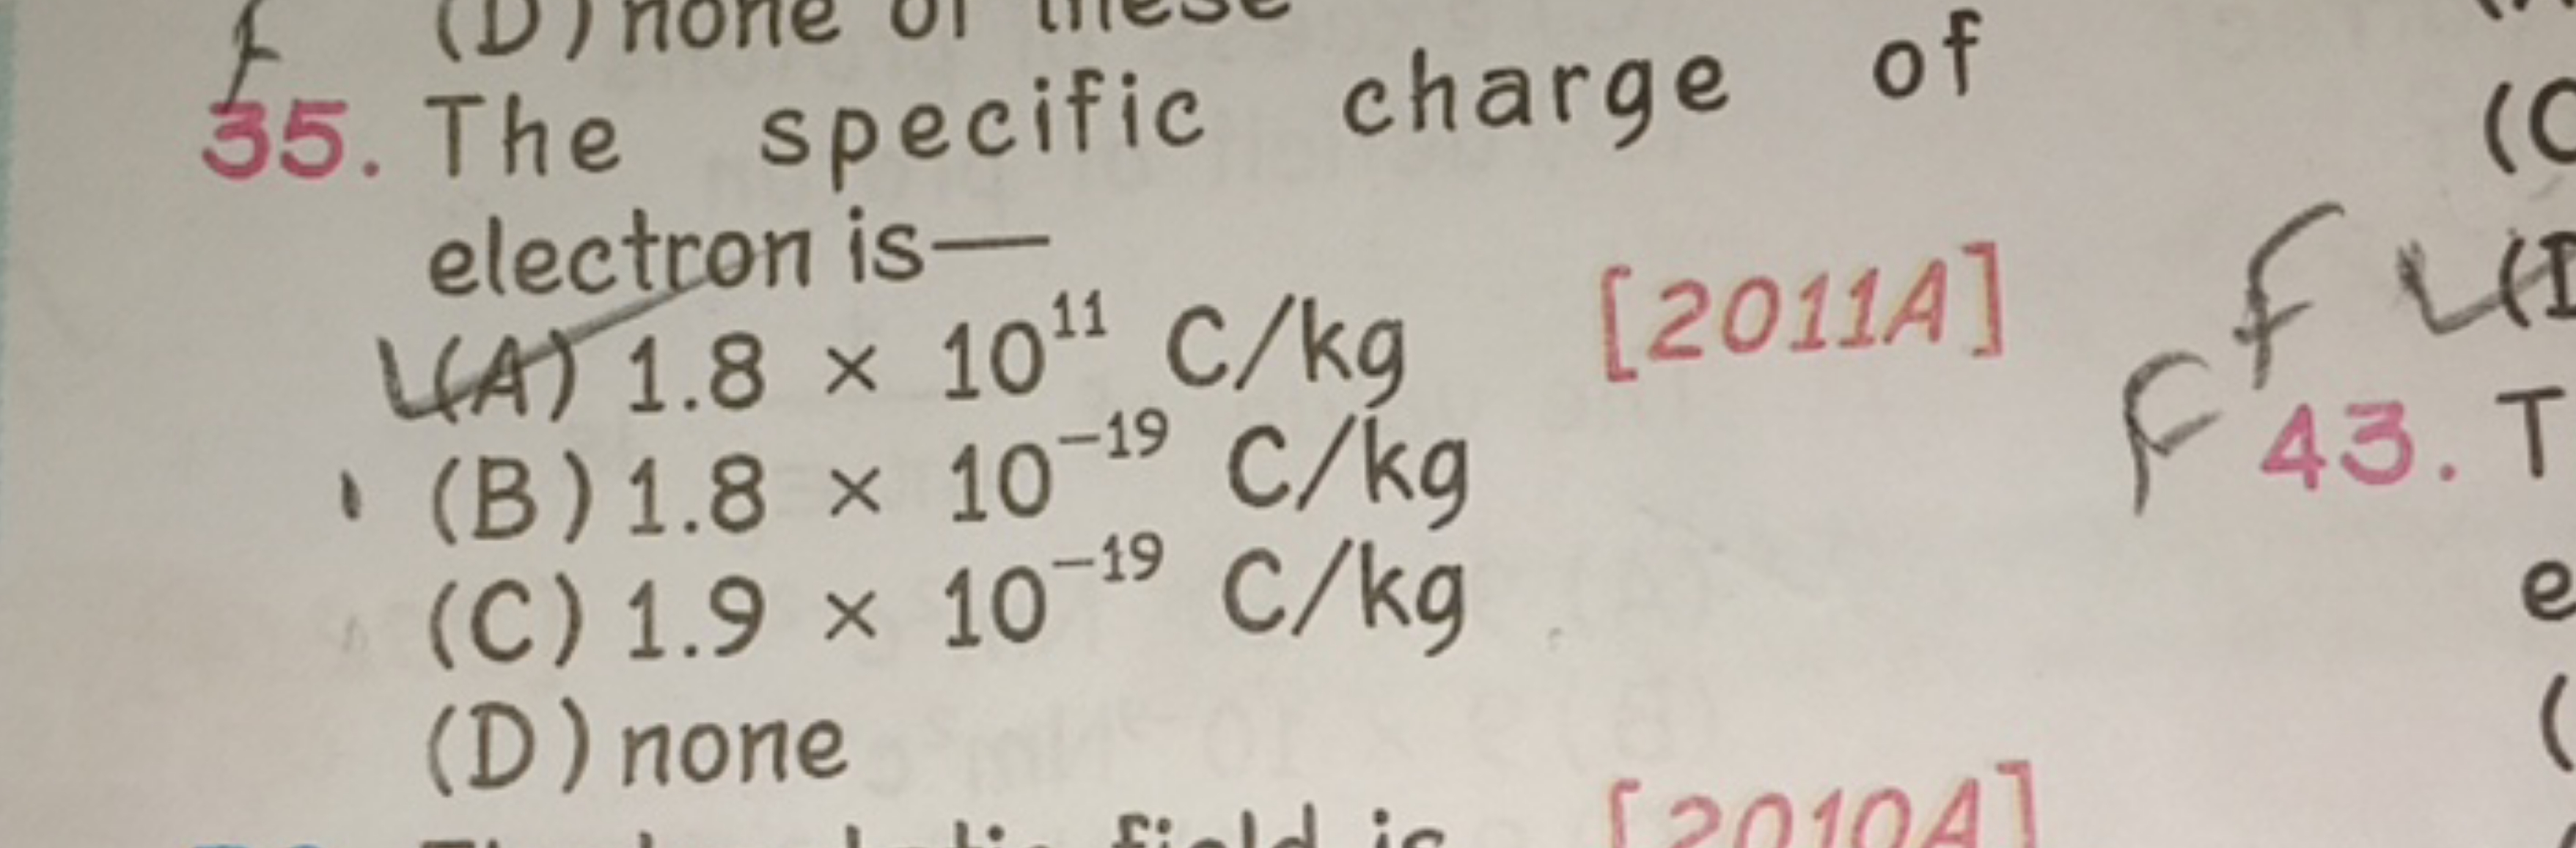 55. The specific charge of electron is-
(A) 1.8×1011C/kg
[2011A]
(B) 1